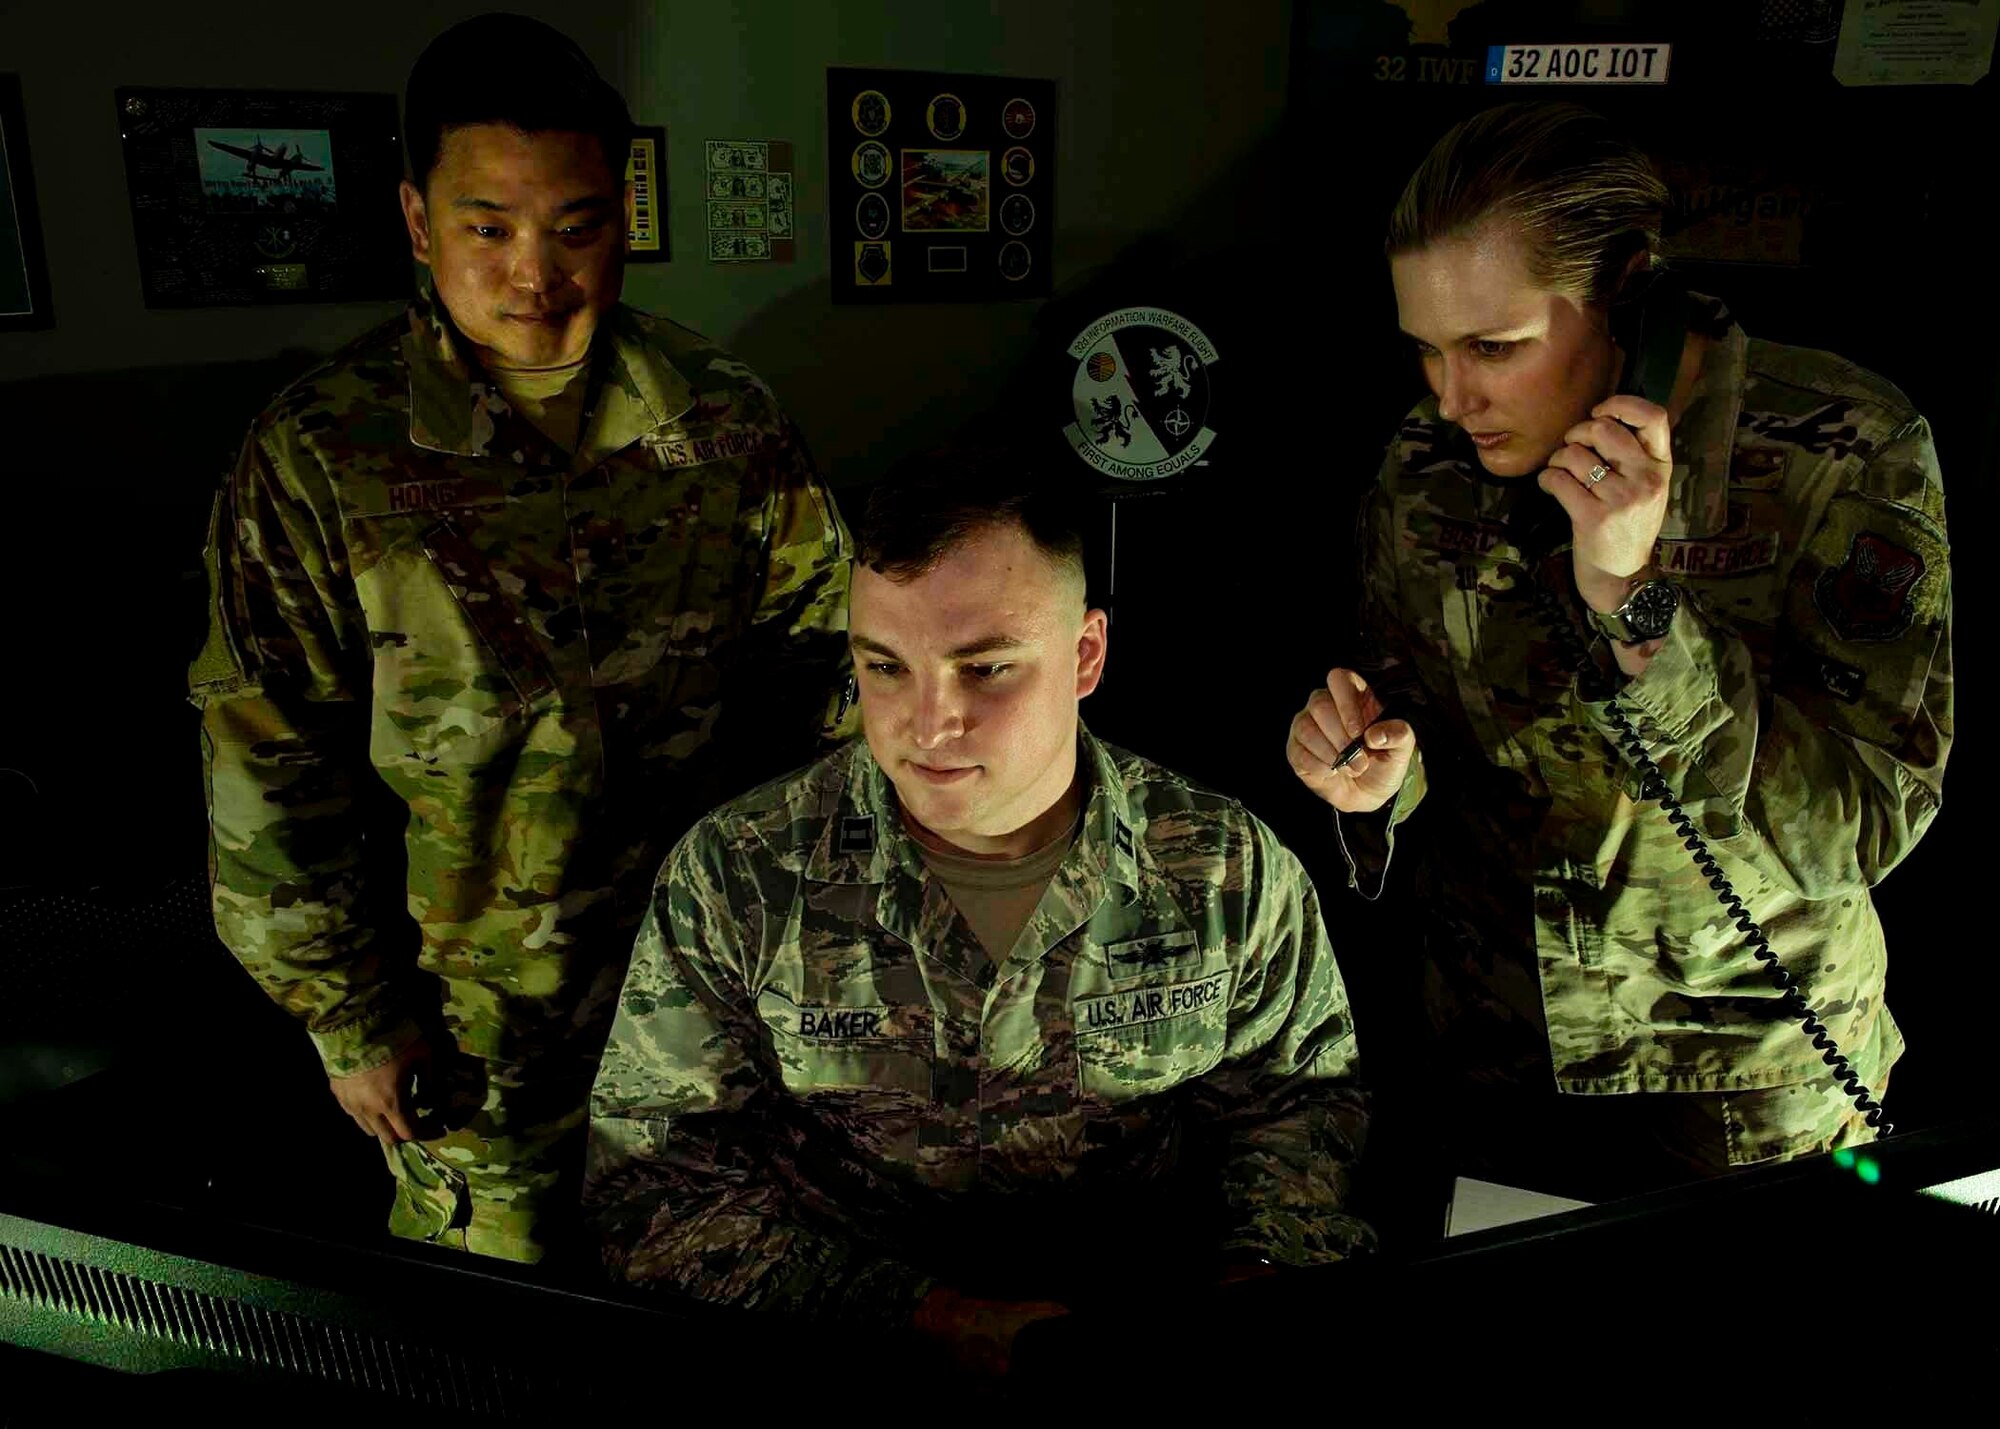 Two Airmen look at a computer while one speaks on the phone.